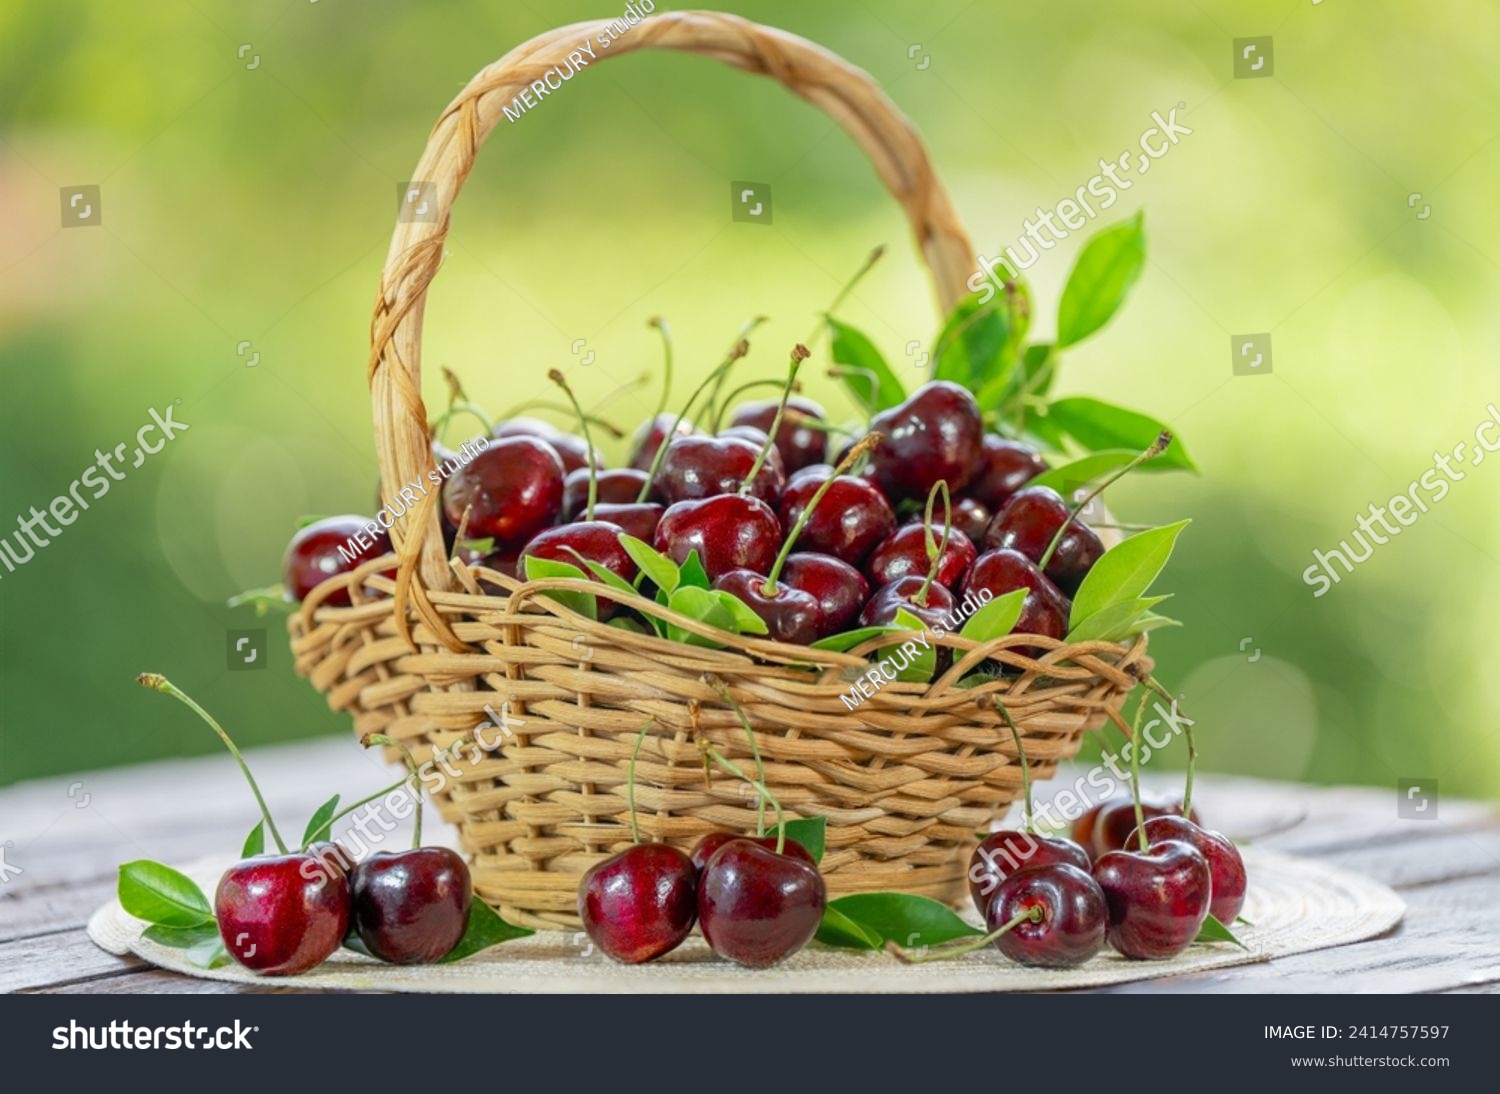 Red Cherry fruit in wooden basket on wooden table in garden, Red Cherry on blurred greenery background. #2414757597